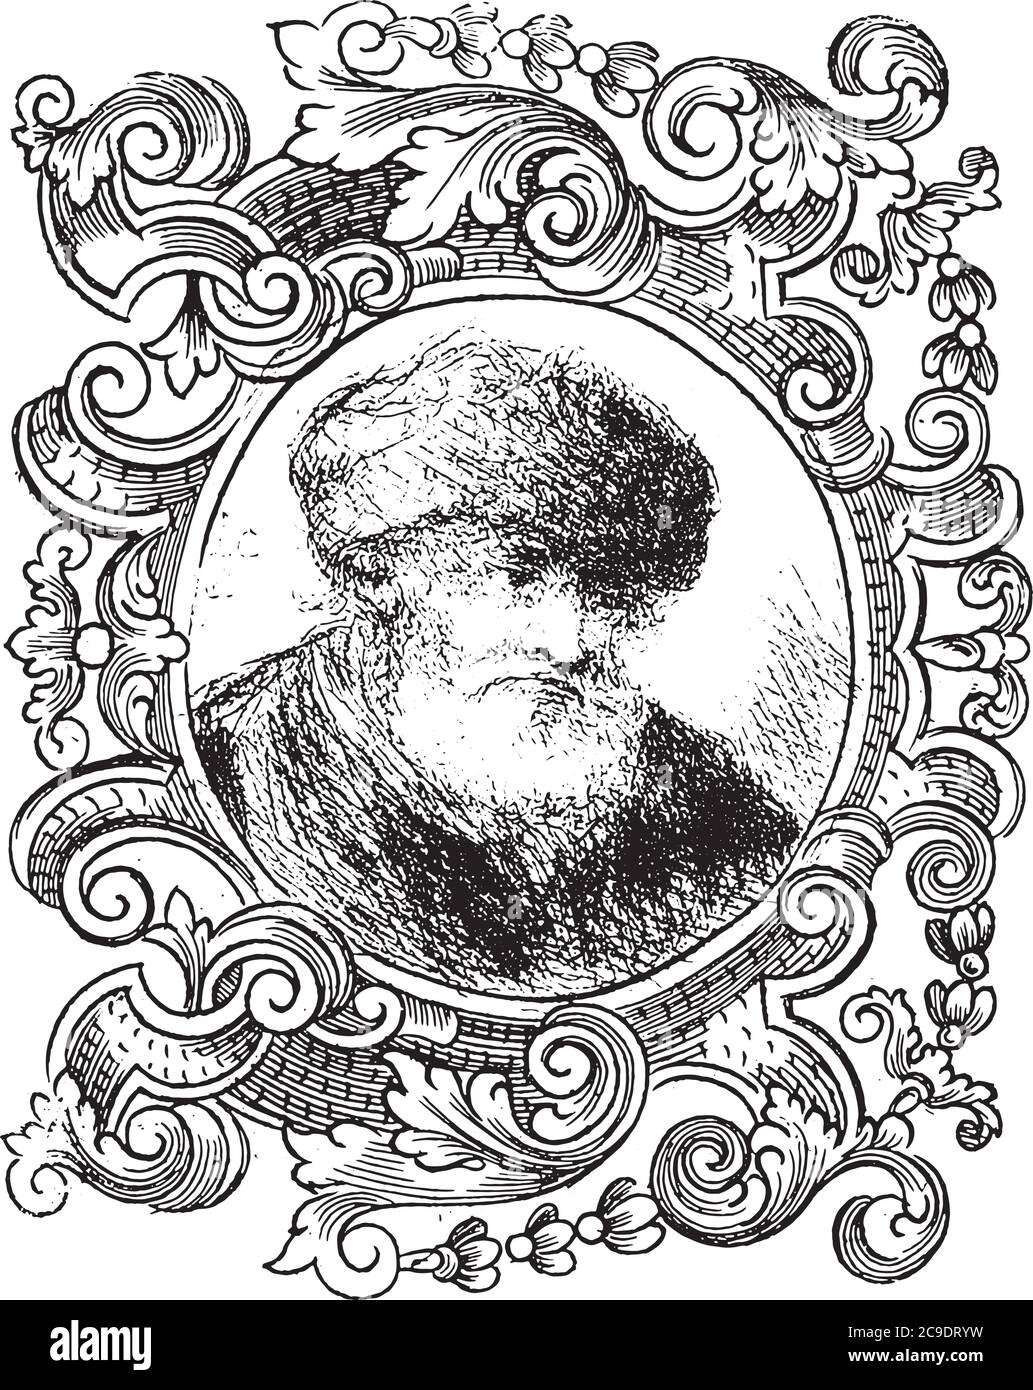 Old Man with a Fur Hat in an Ornament Border, Jan Chalon, 1802, vintage engraving. Stock Vector